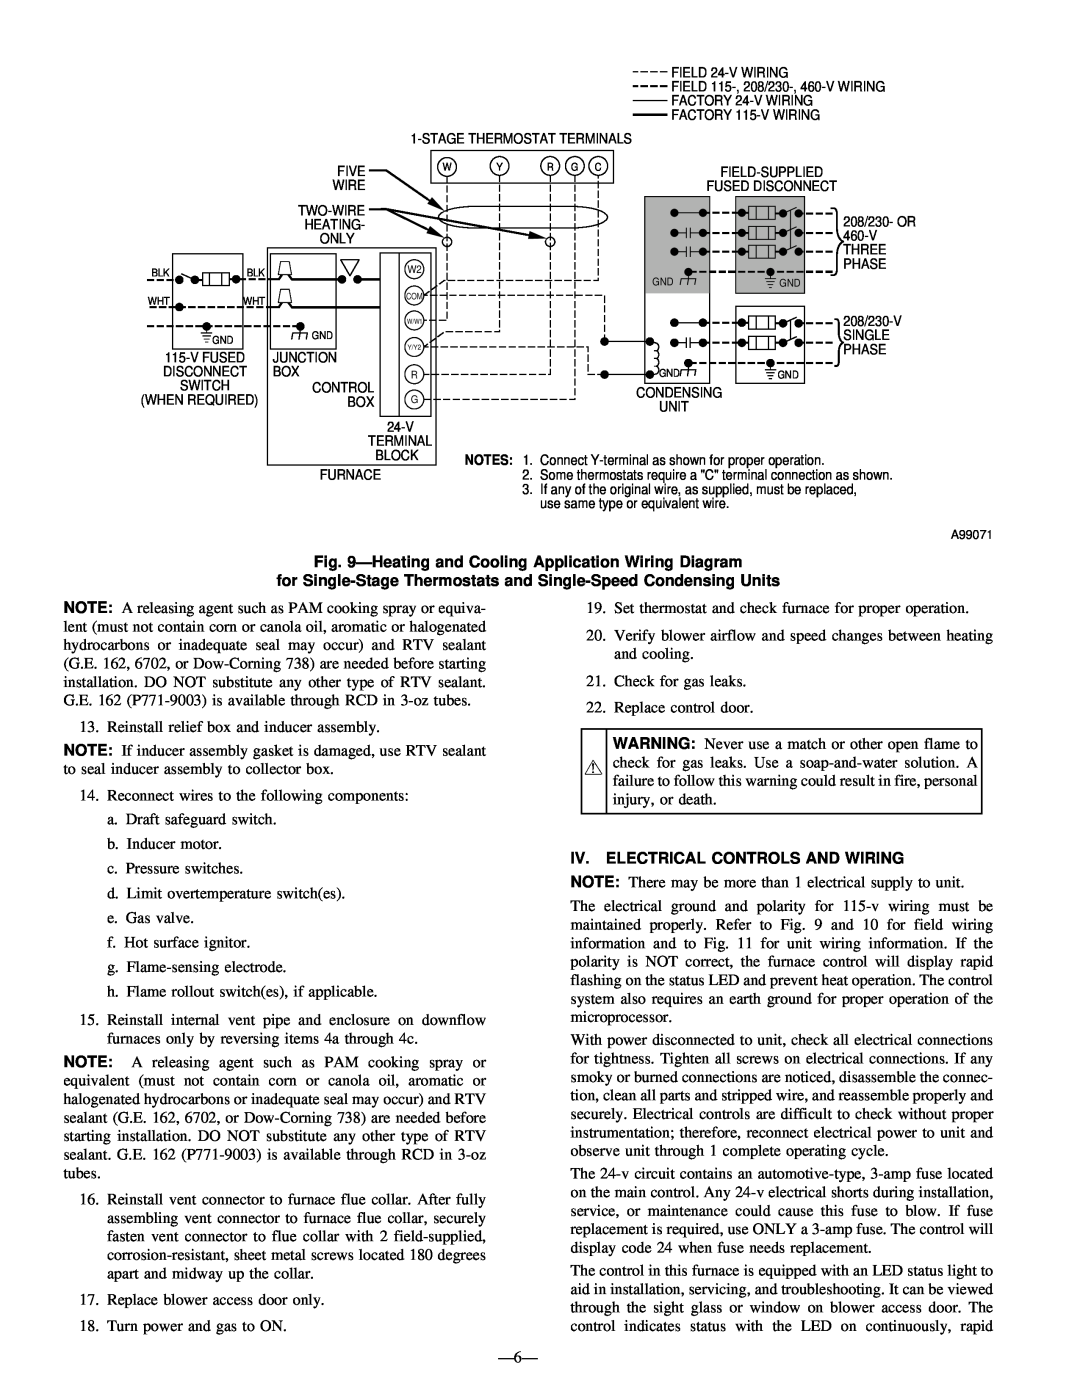 Bryant 331JAV, 330JAV instruction manual Iv. Electrical Controls And Wiring 